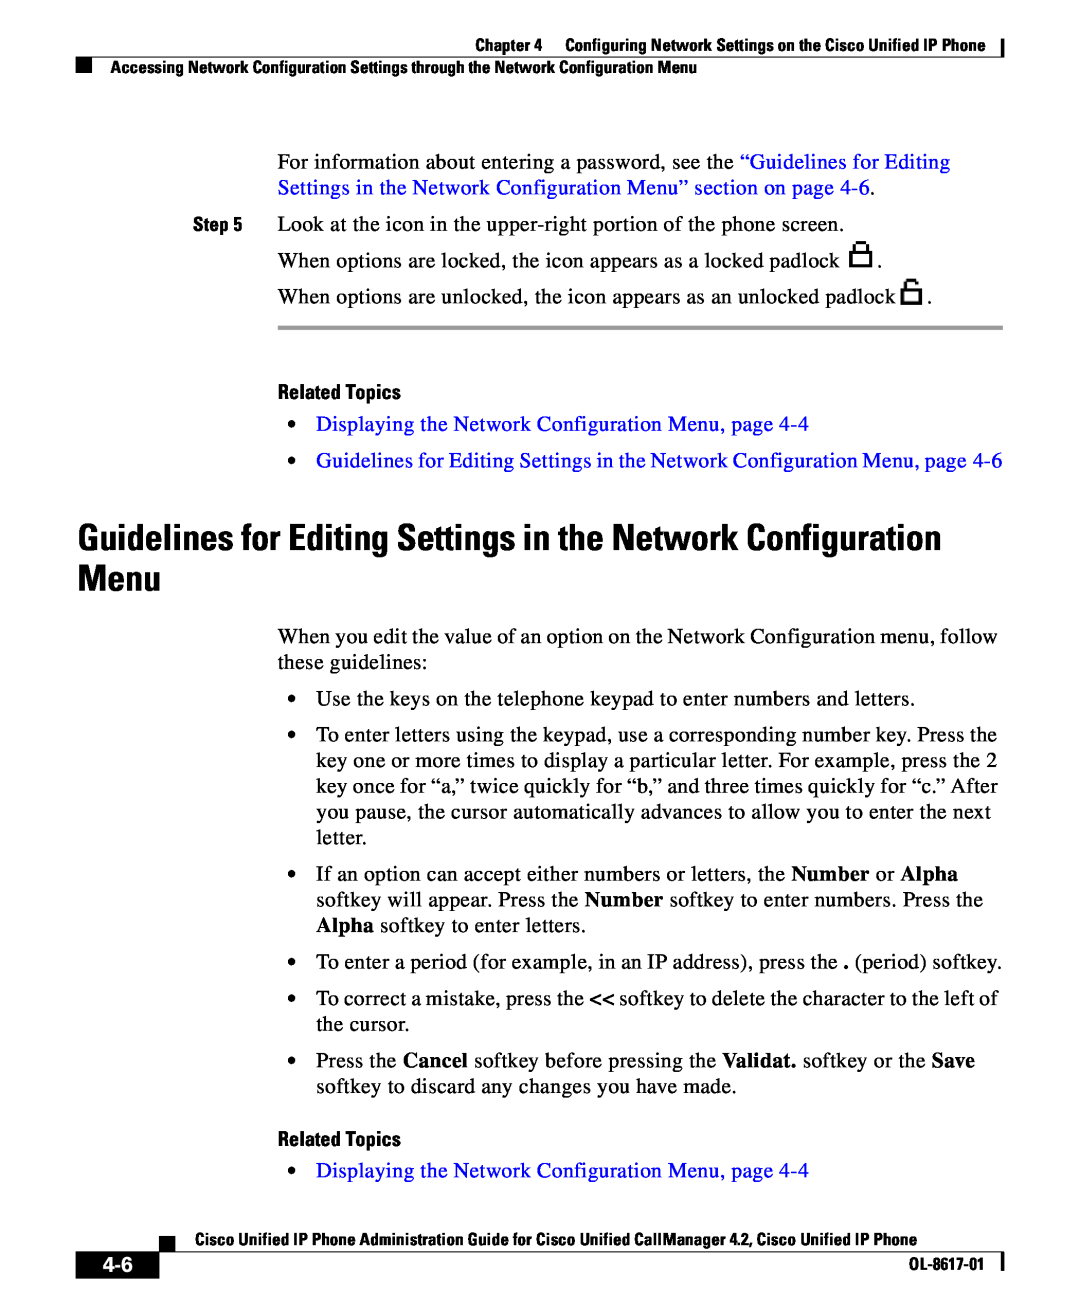 Cisco Systems 4.2 manual Guidelines for Editing Settings in the Network Configuration Menu, Related Topics 